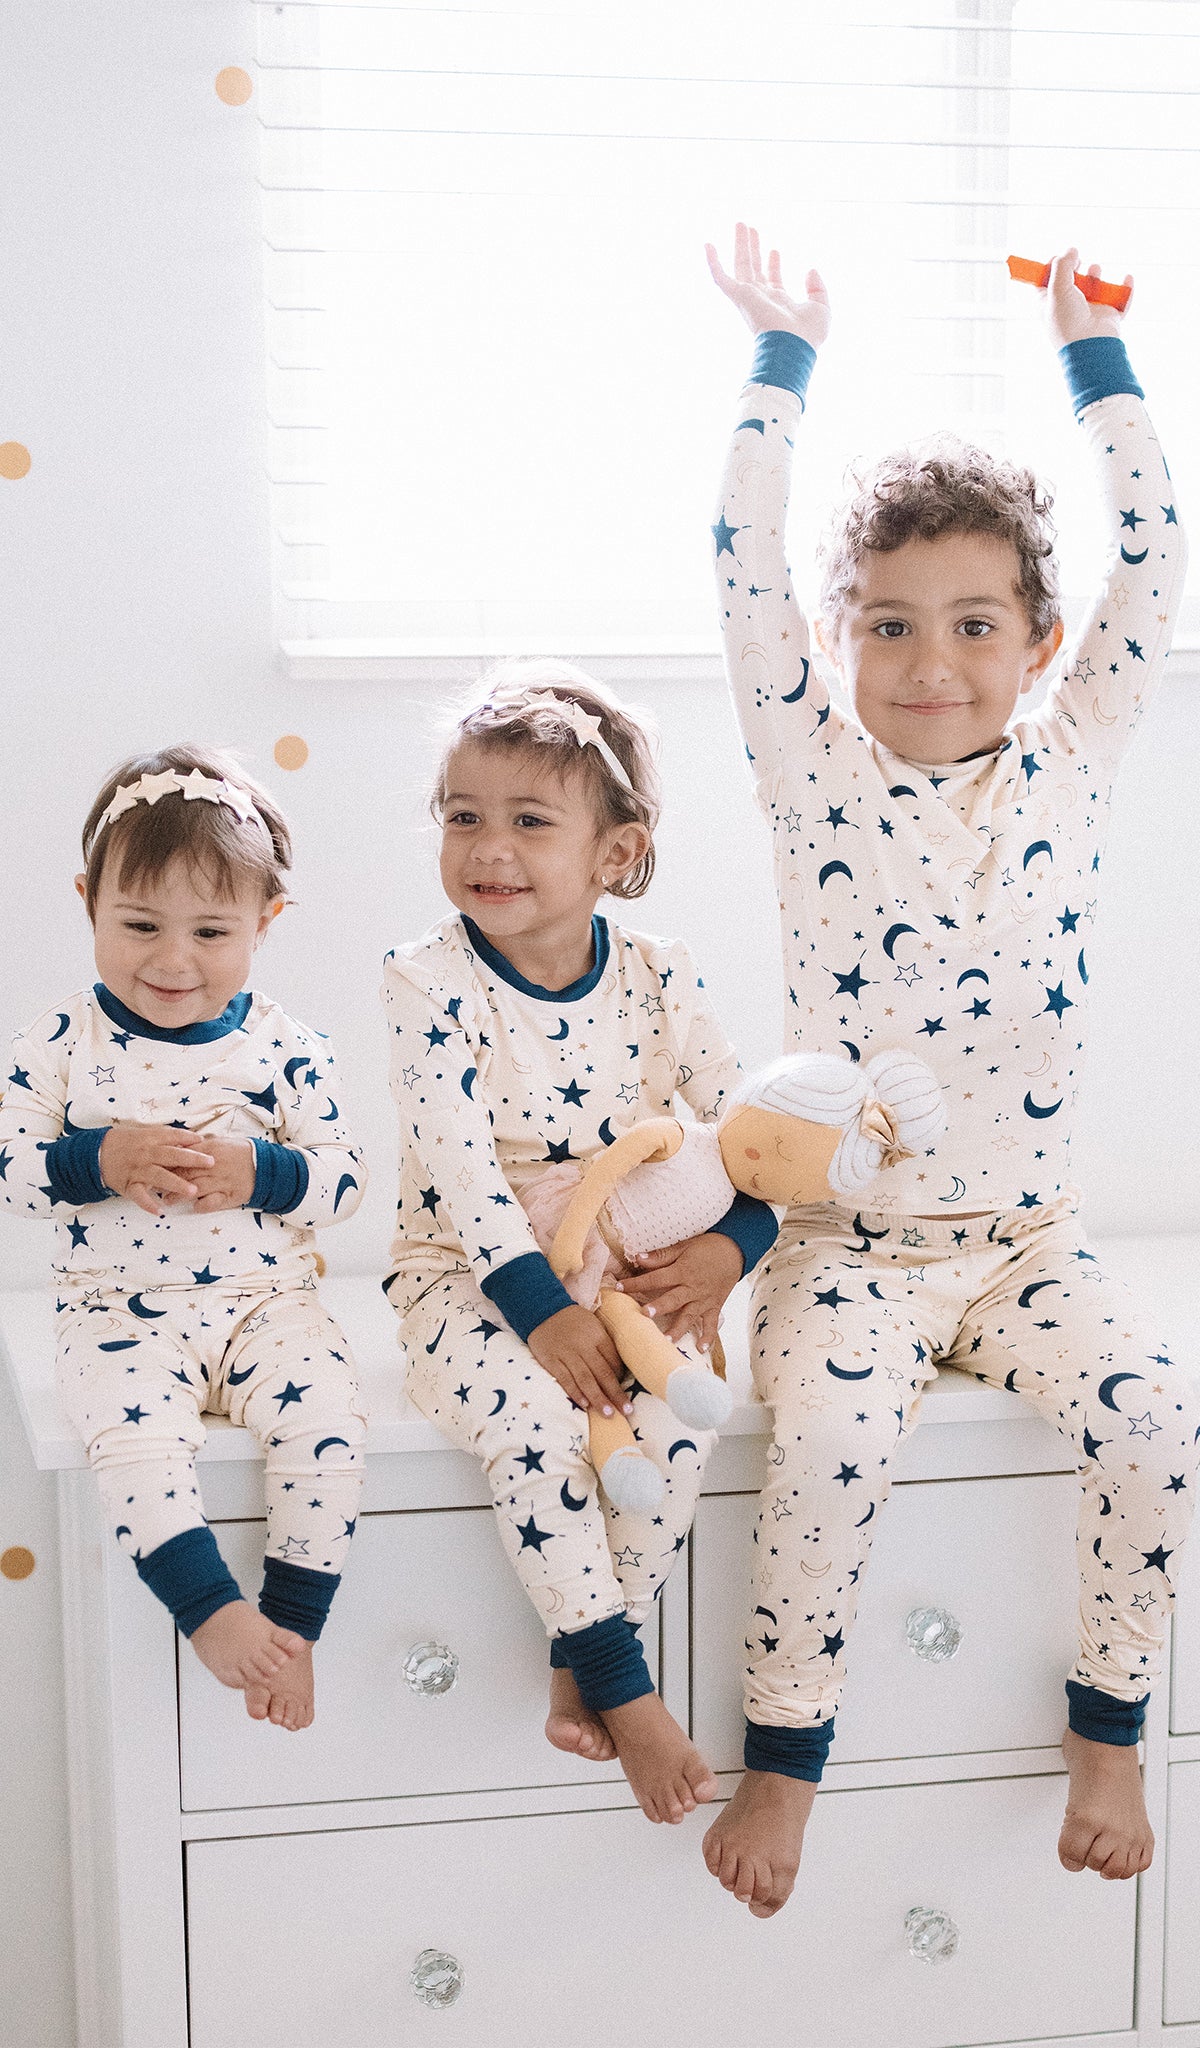 Twinkle Emerson Baby 2-Piece Pant PJ worn by baby girl sitting next to her big sister and brother in matching PJs.